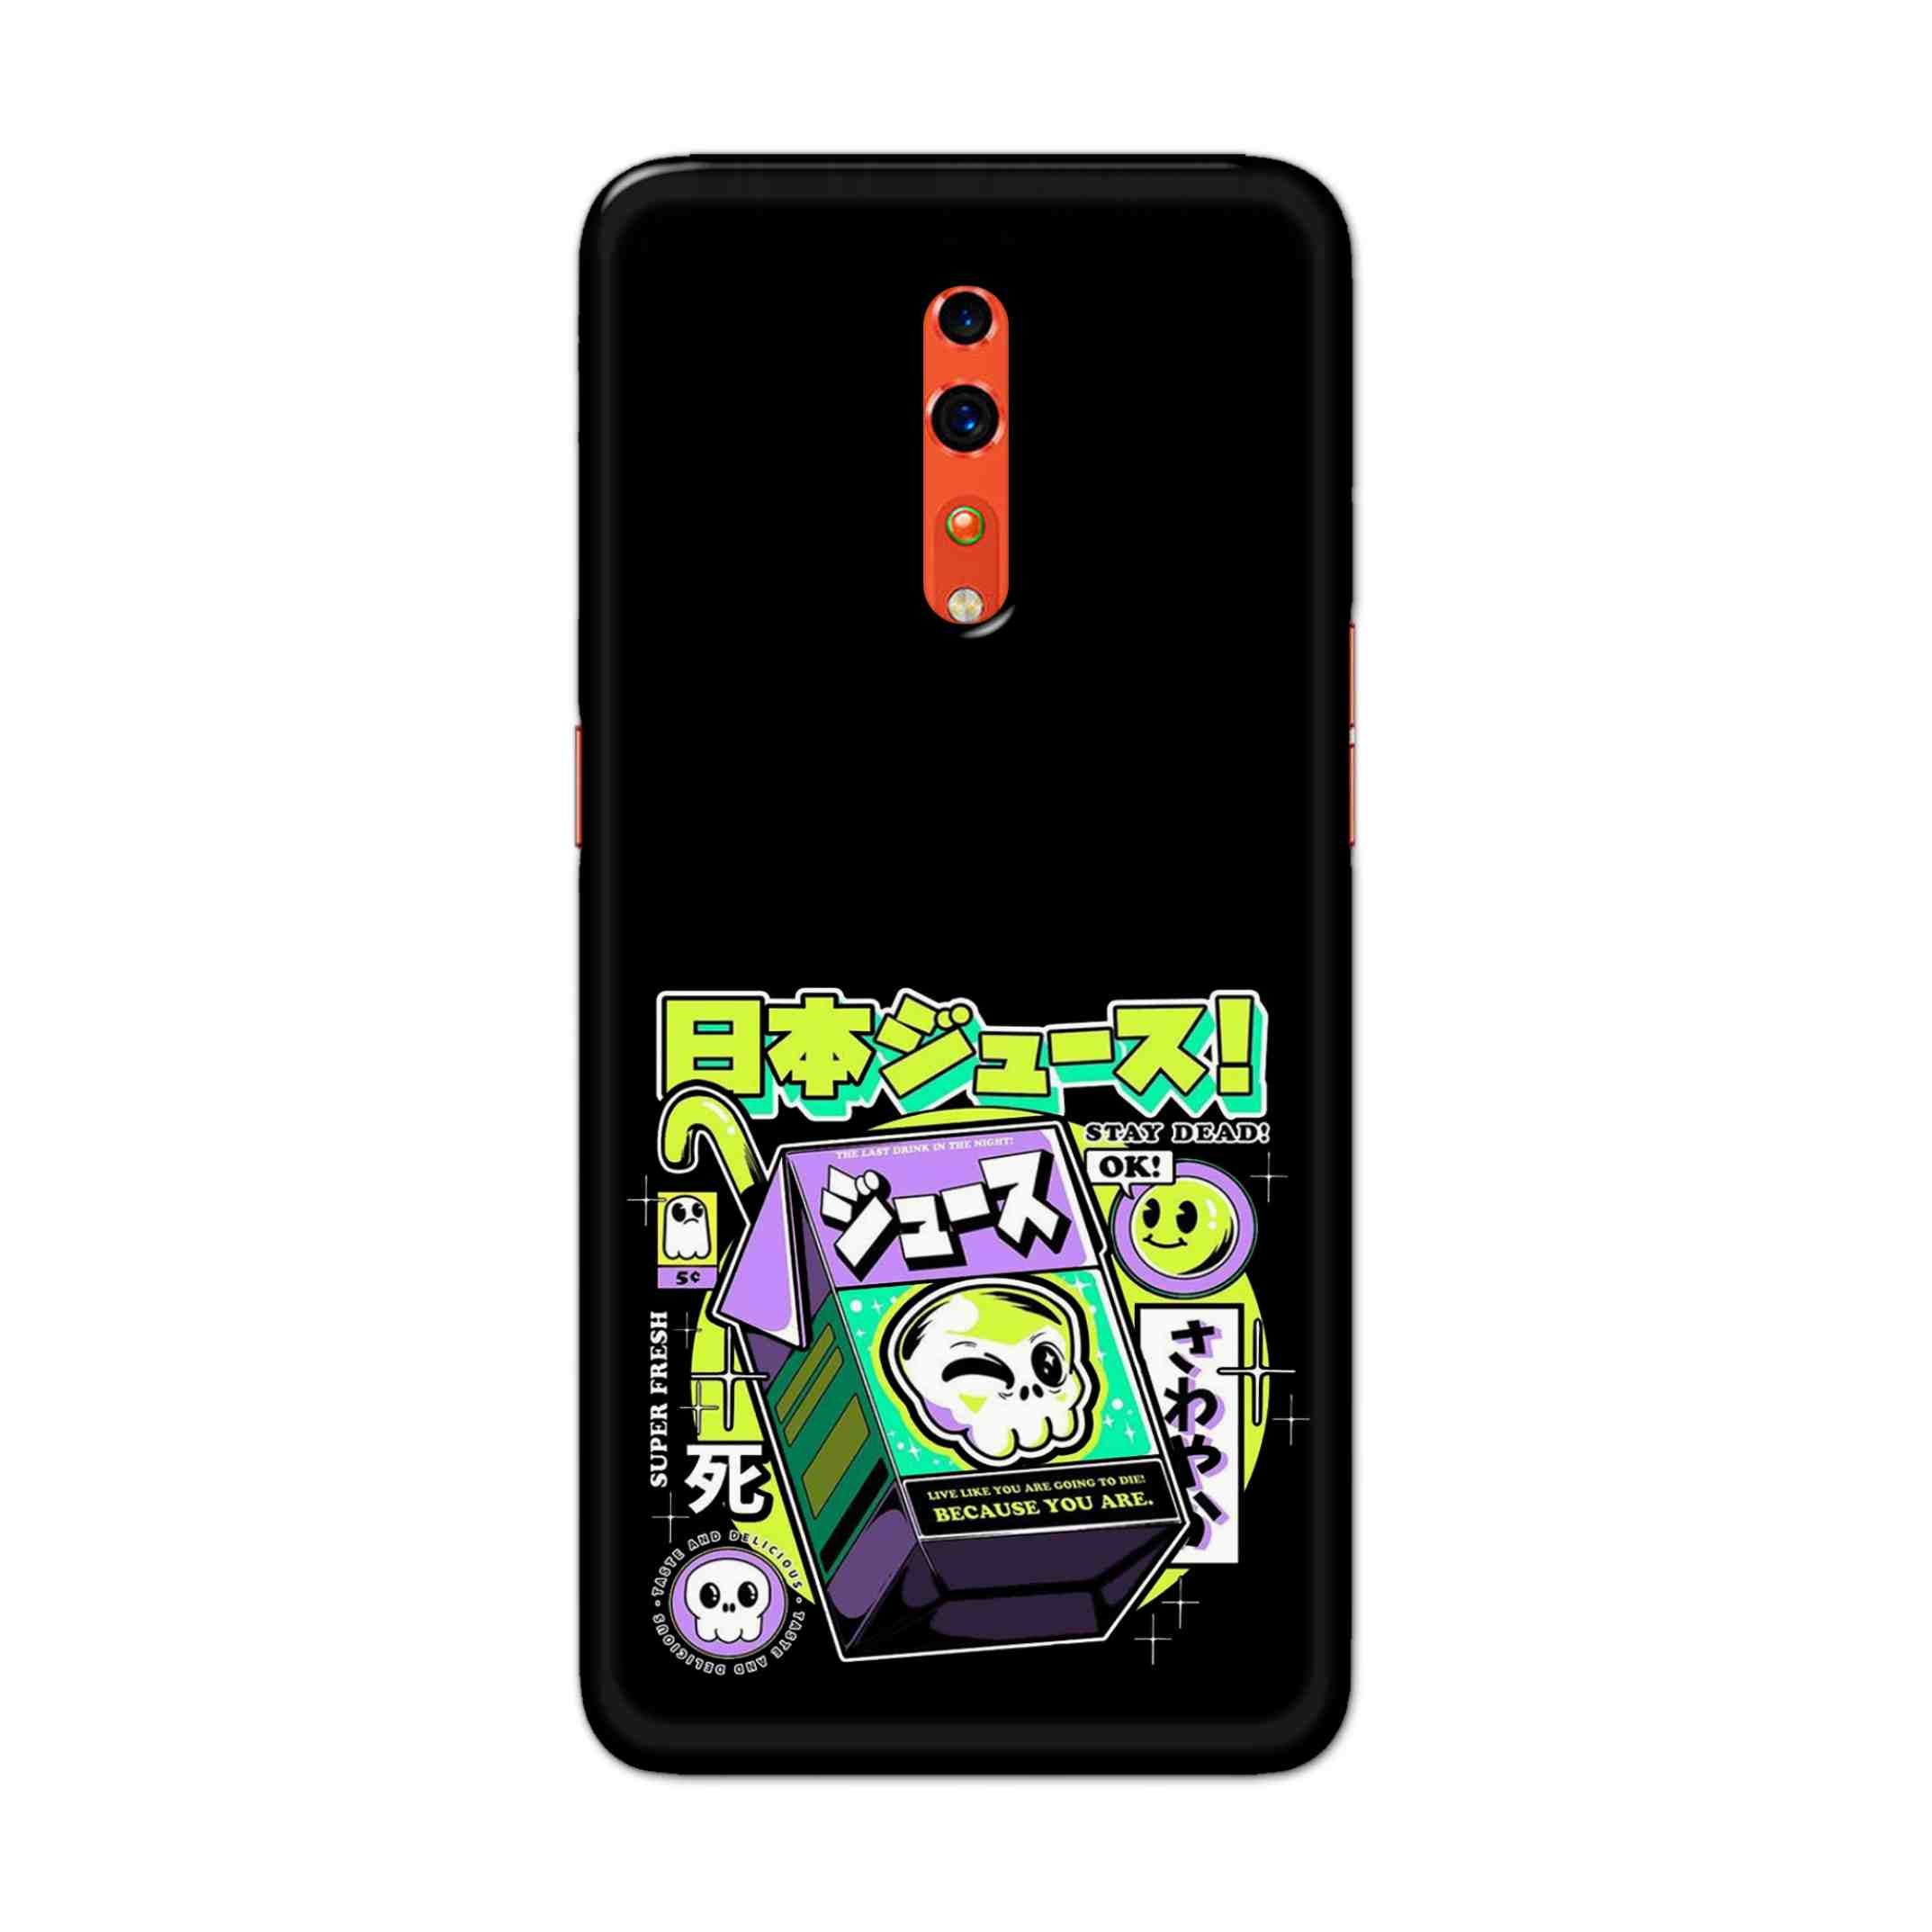 Buy Because You Are Hard Back Mobile Phone Case Cover For OPPO Reno Z Online